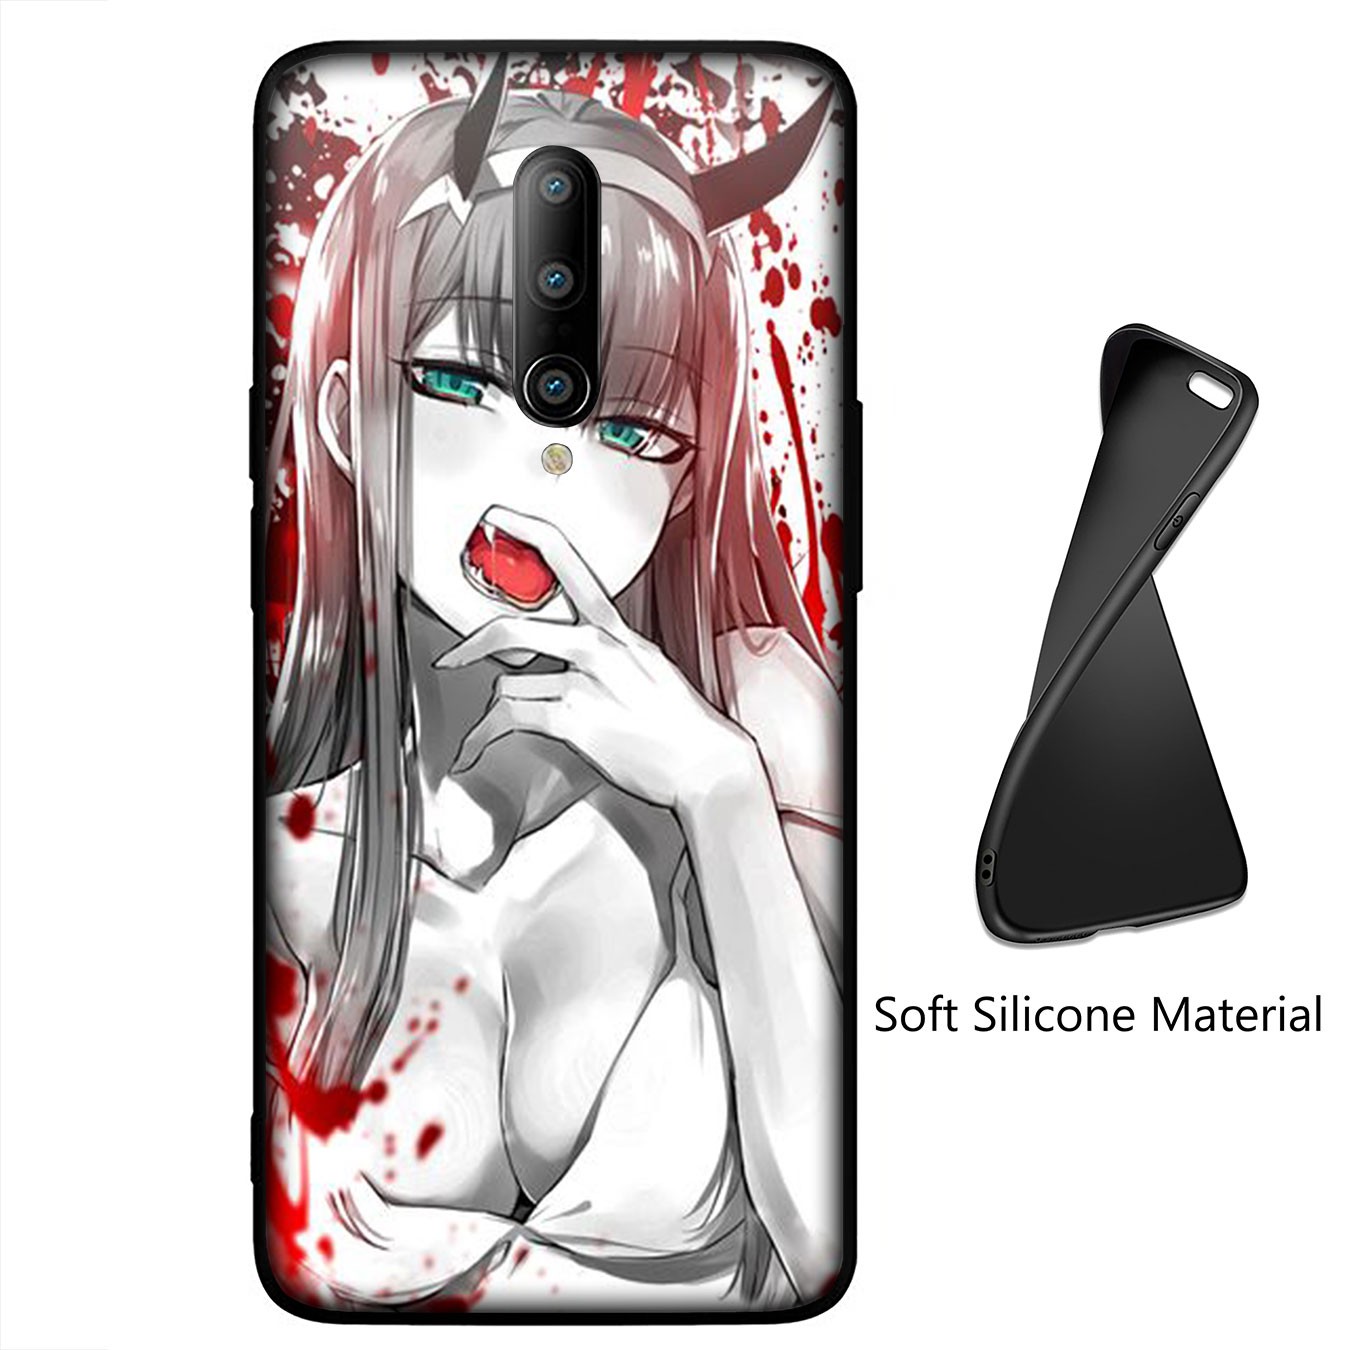 Samsung Galaxy S9 S10 S20 FE Ultra Plus Lite S20+ S9+ S10+ S20Plus Casing Soft Silicone Phone Case Darling in the Franxx Ahegao Girl Cover